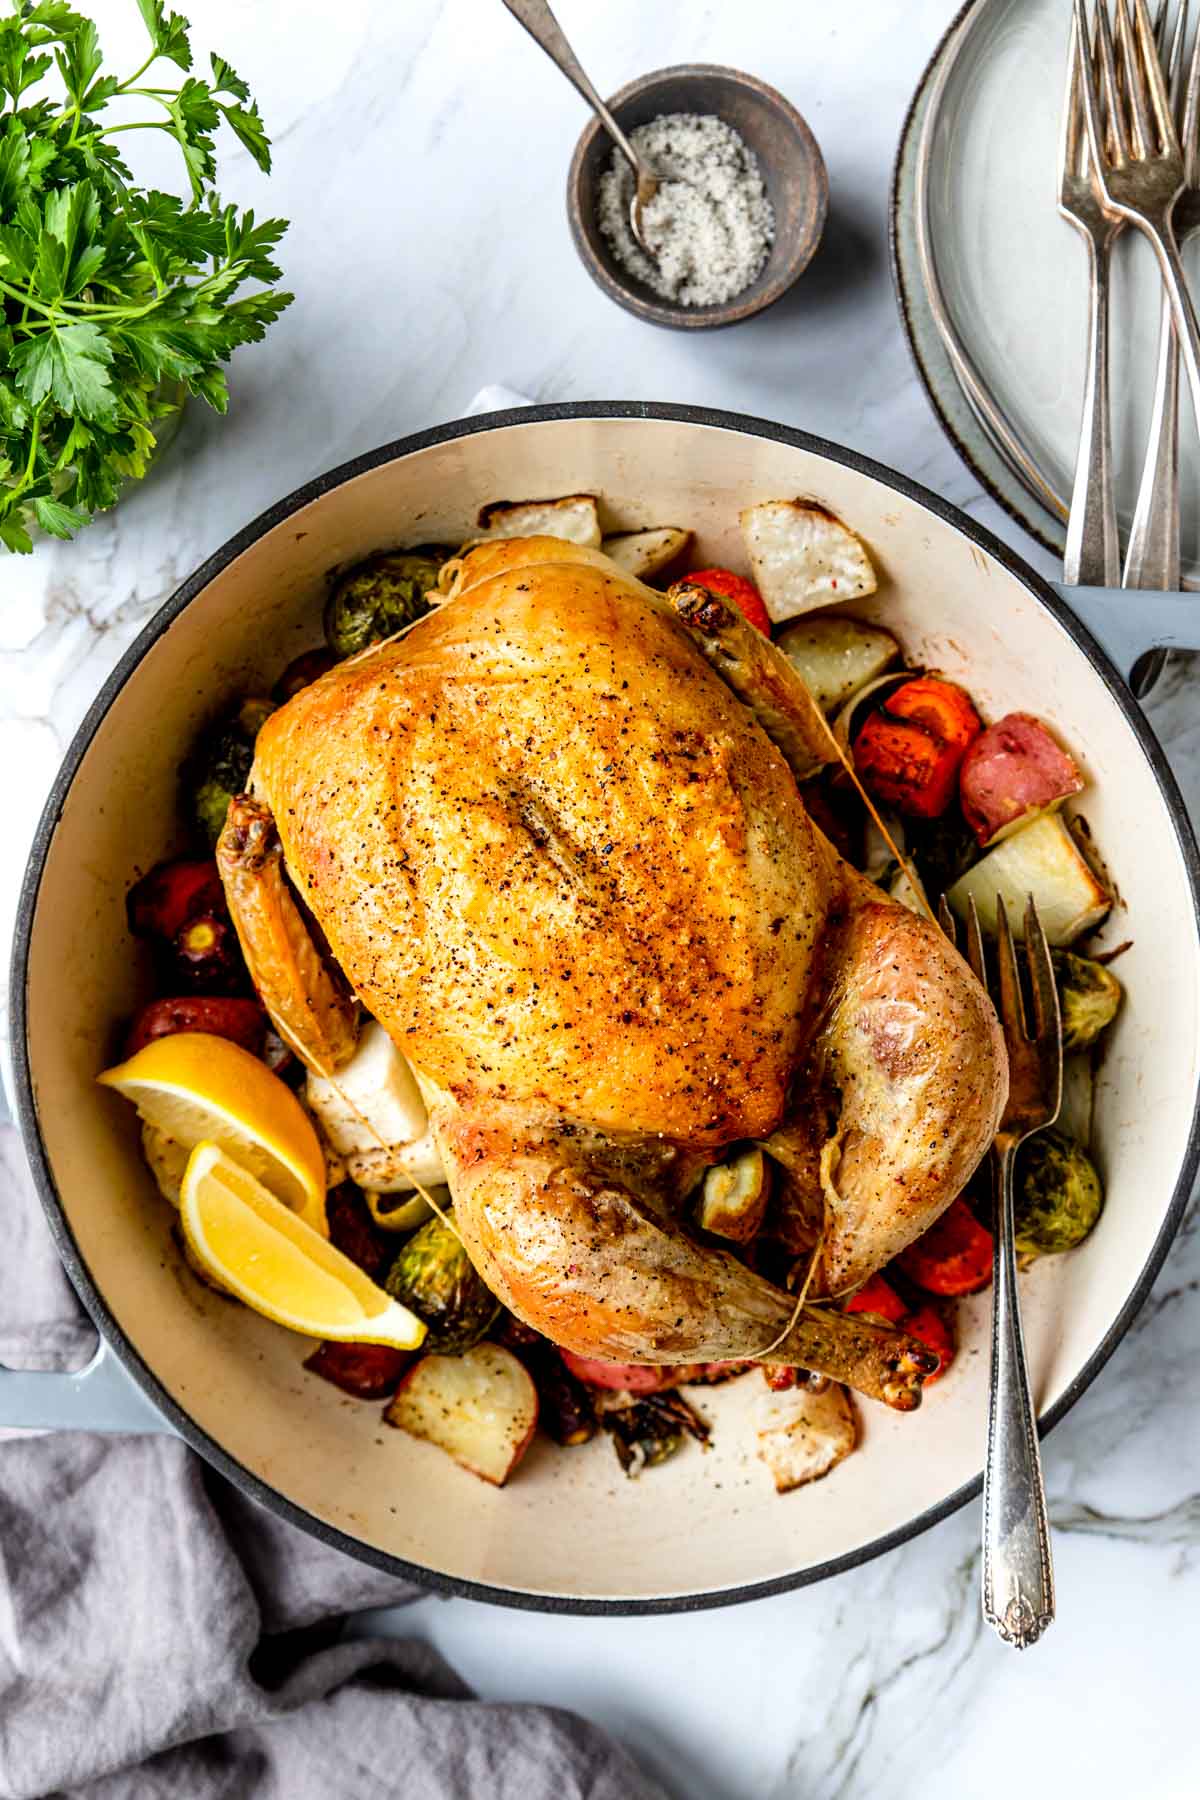 A whole roast chicken in a Dutch oven with veggies